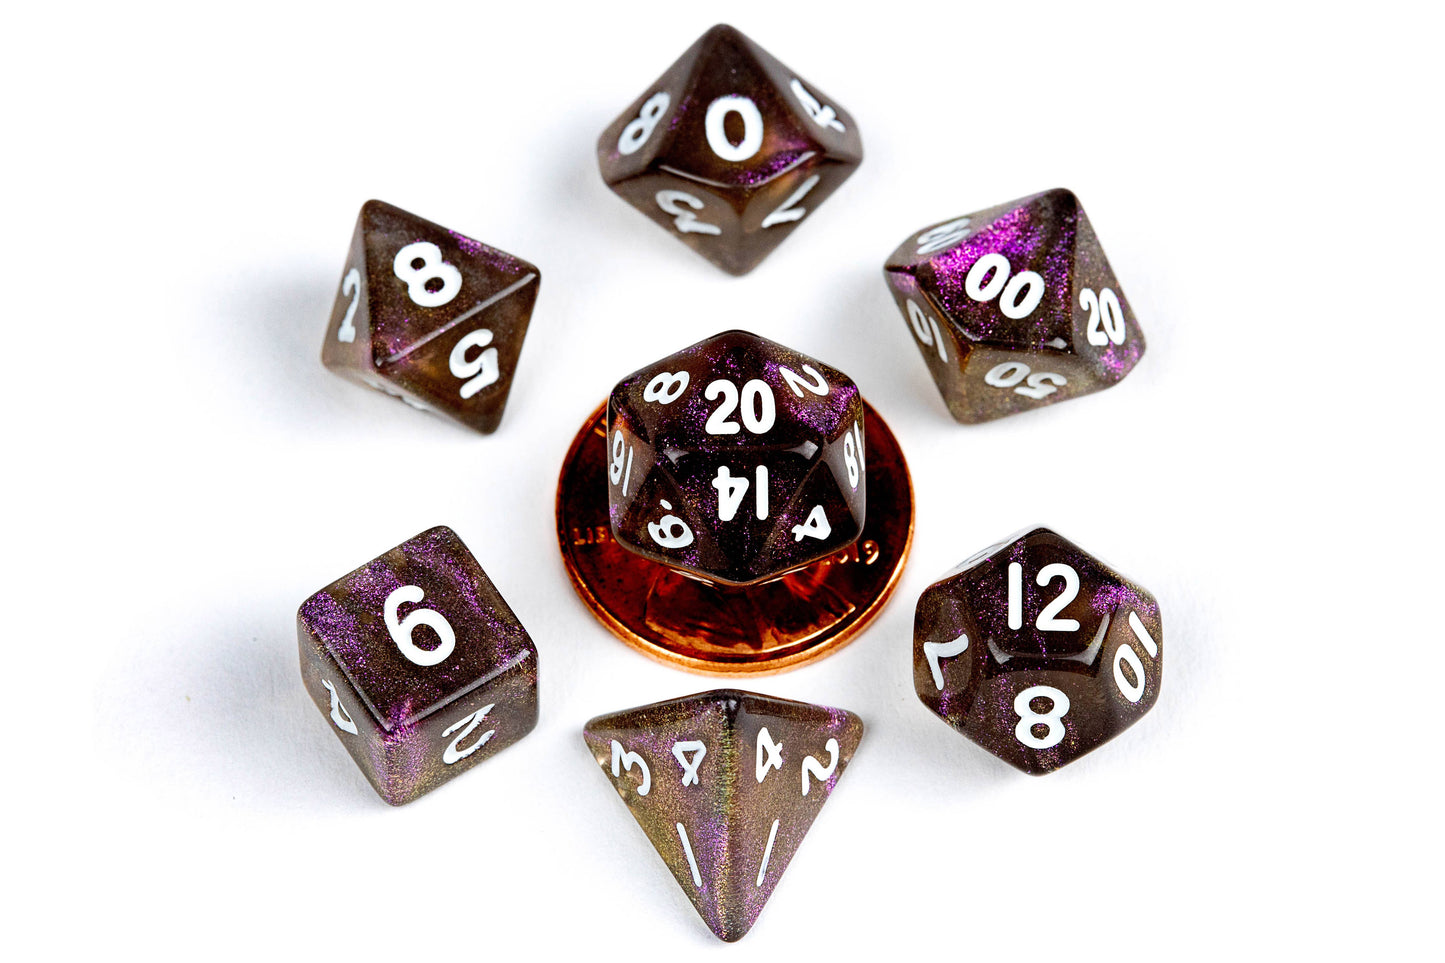 10mm Mini Dice Acrylic Polyhedral Set in Tube - Stardust Supervolcano